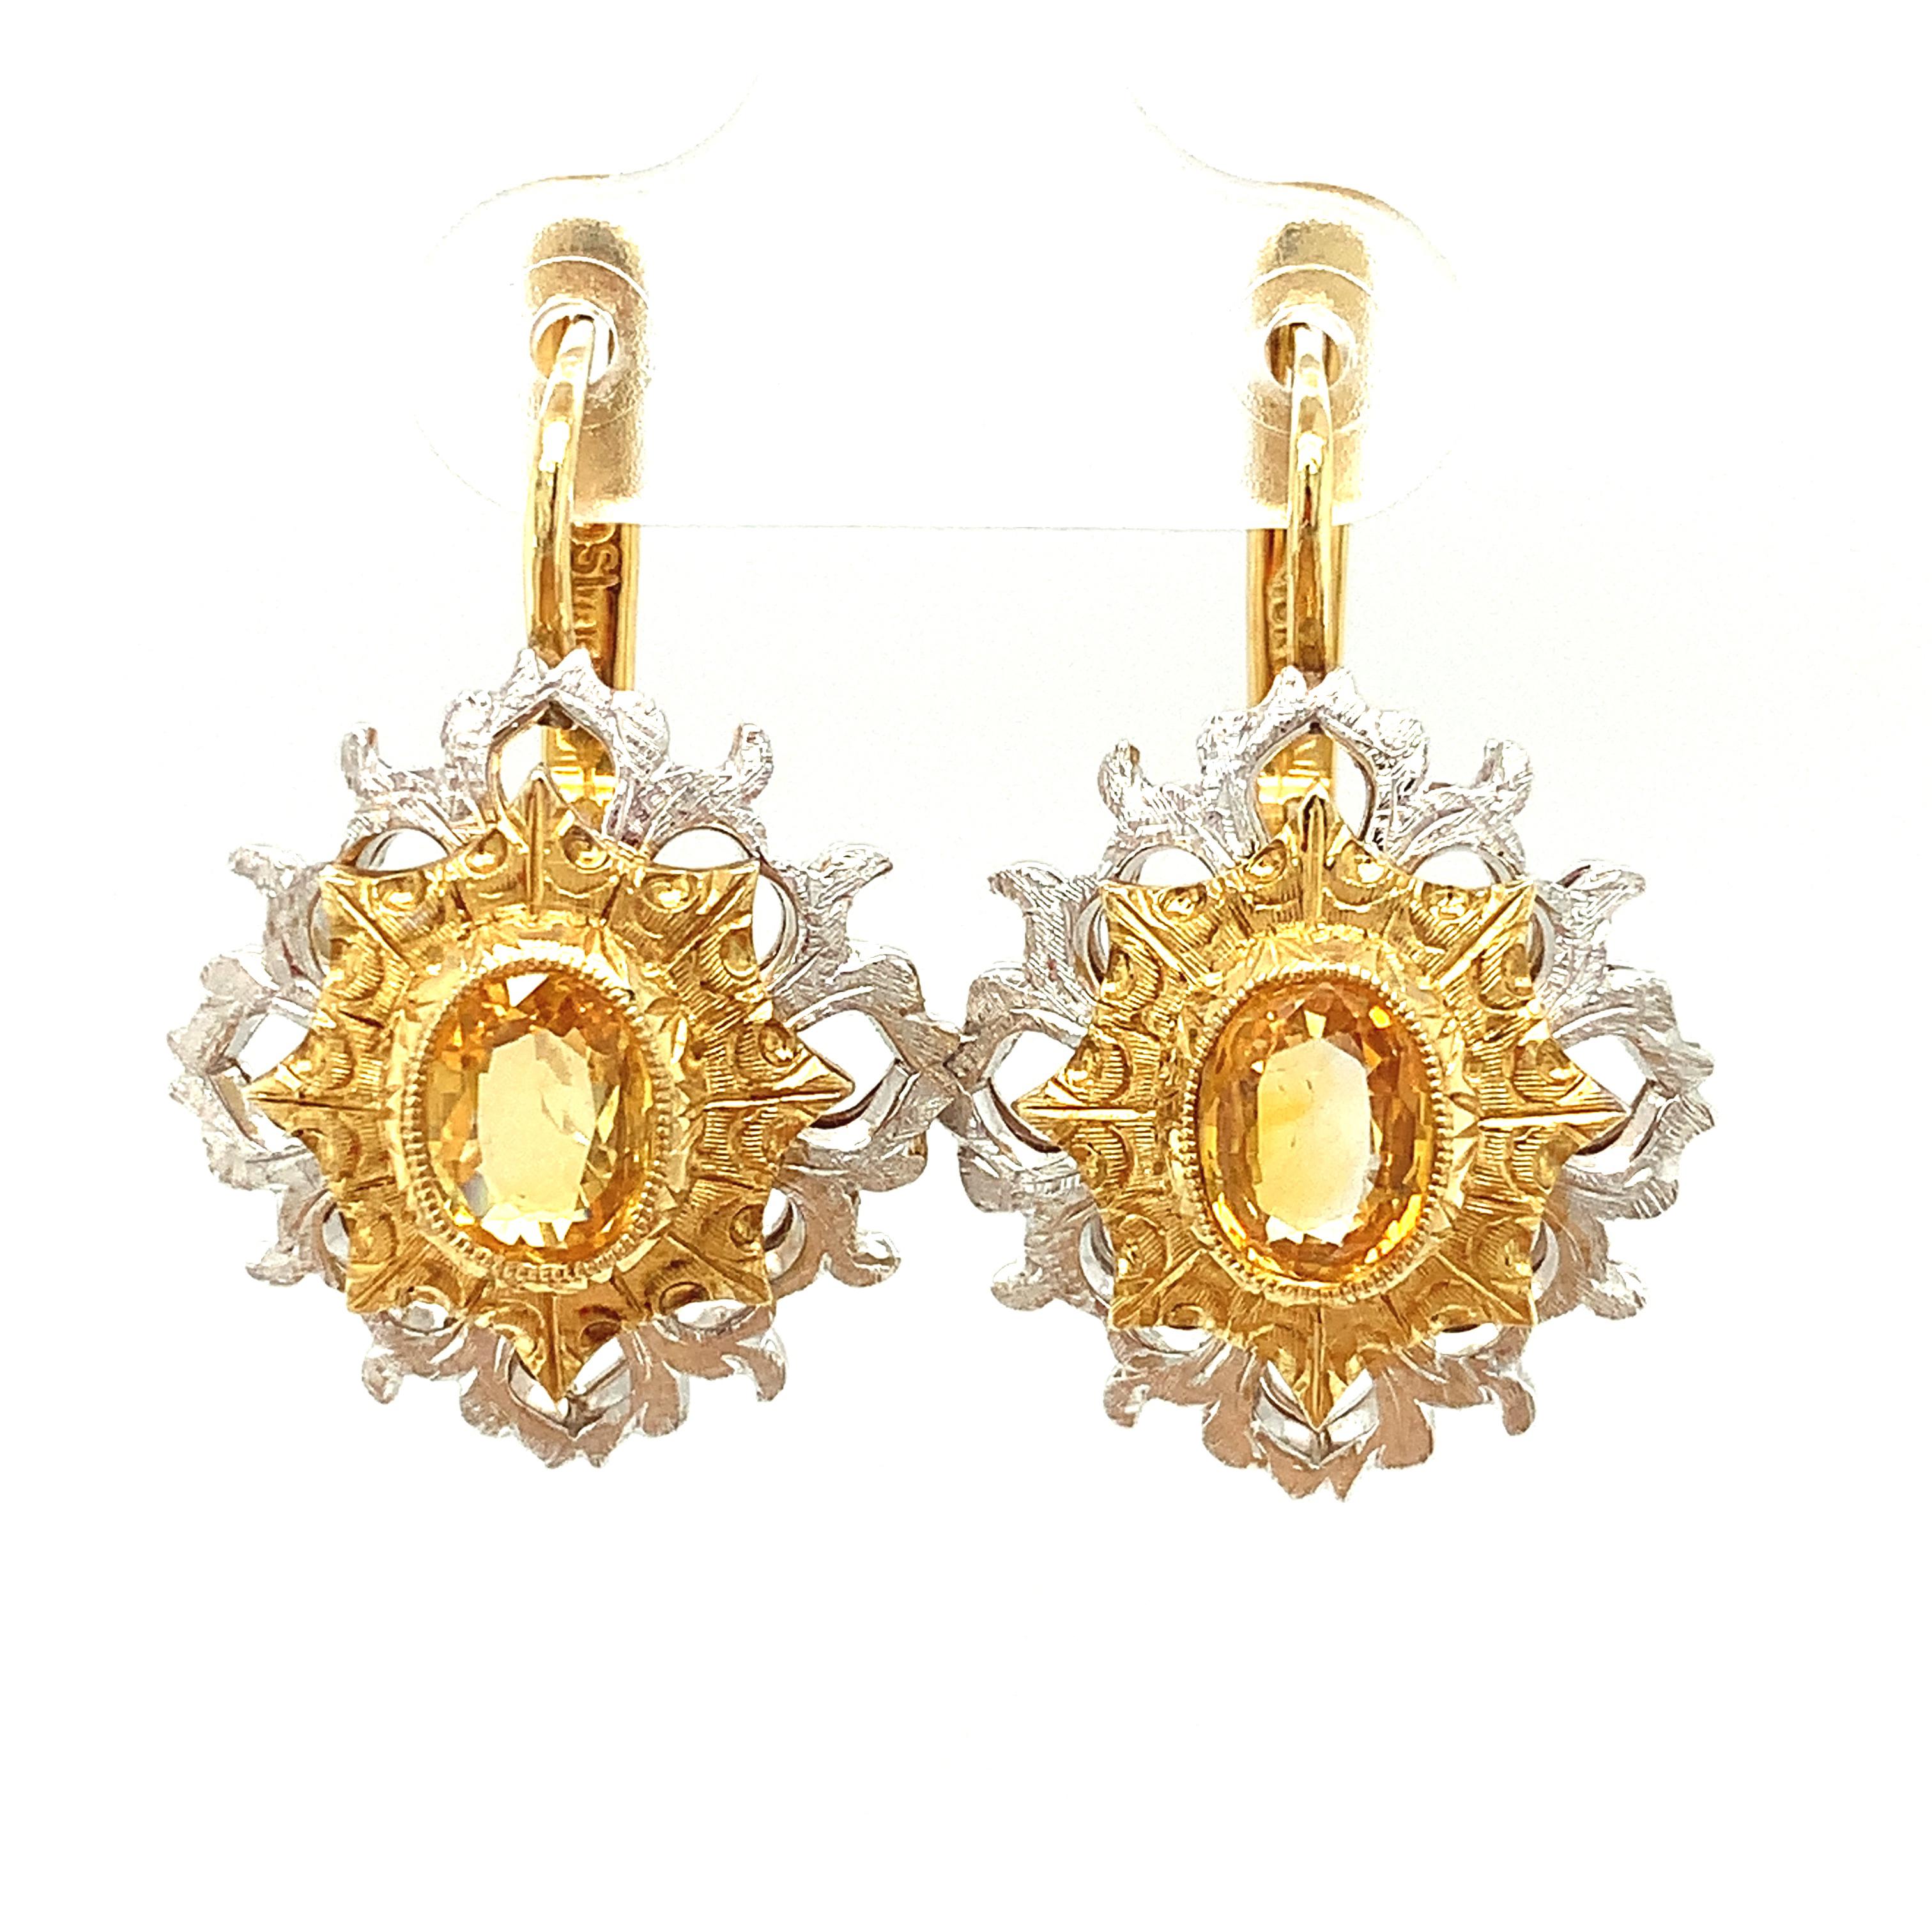 Artisan Yellow Sapphire Drop Earrings in 18K White and Yellow Gold, 1.79 Carat Total For Sale